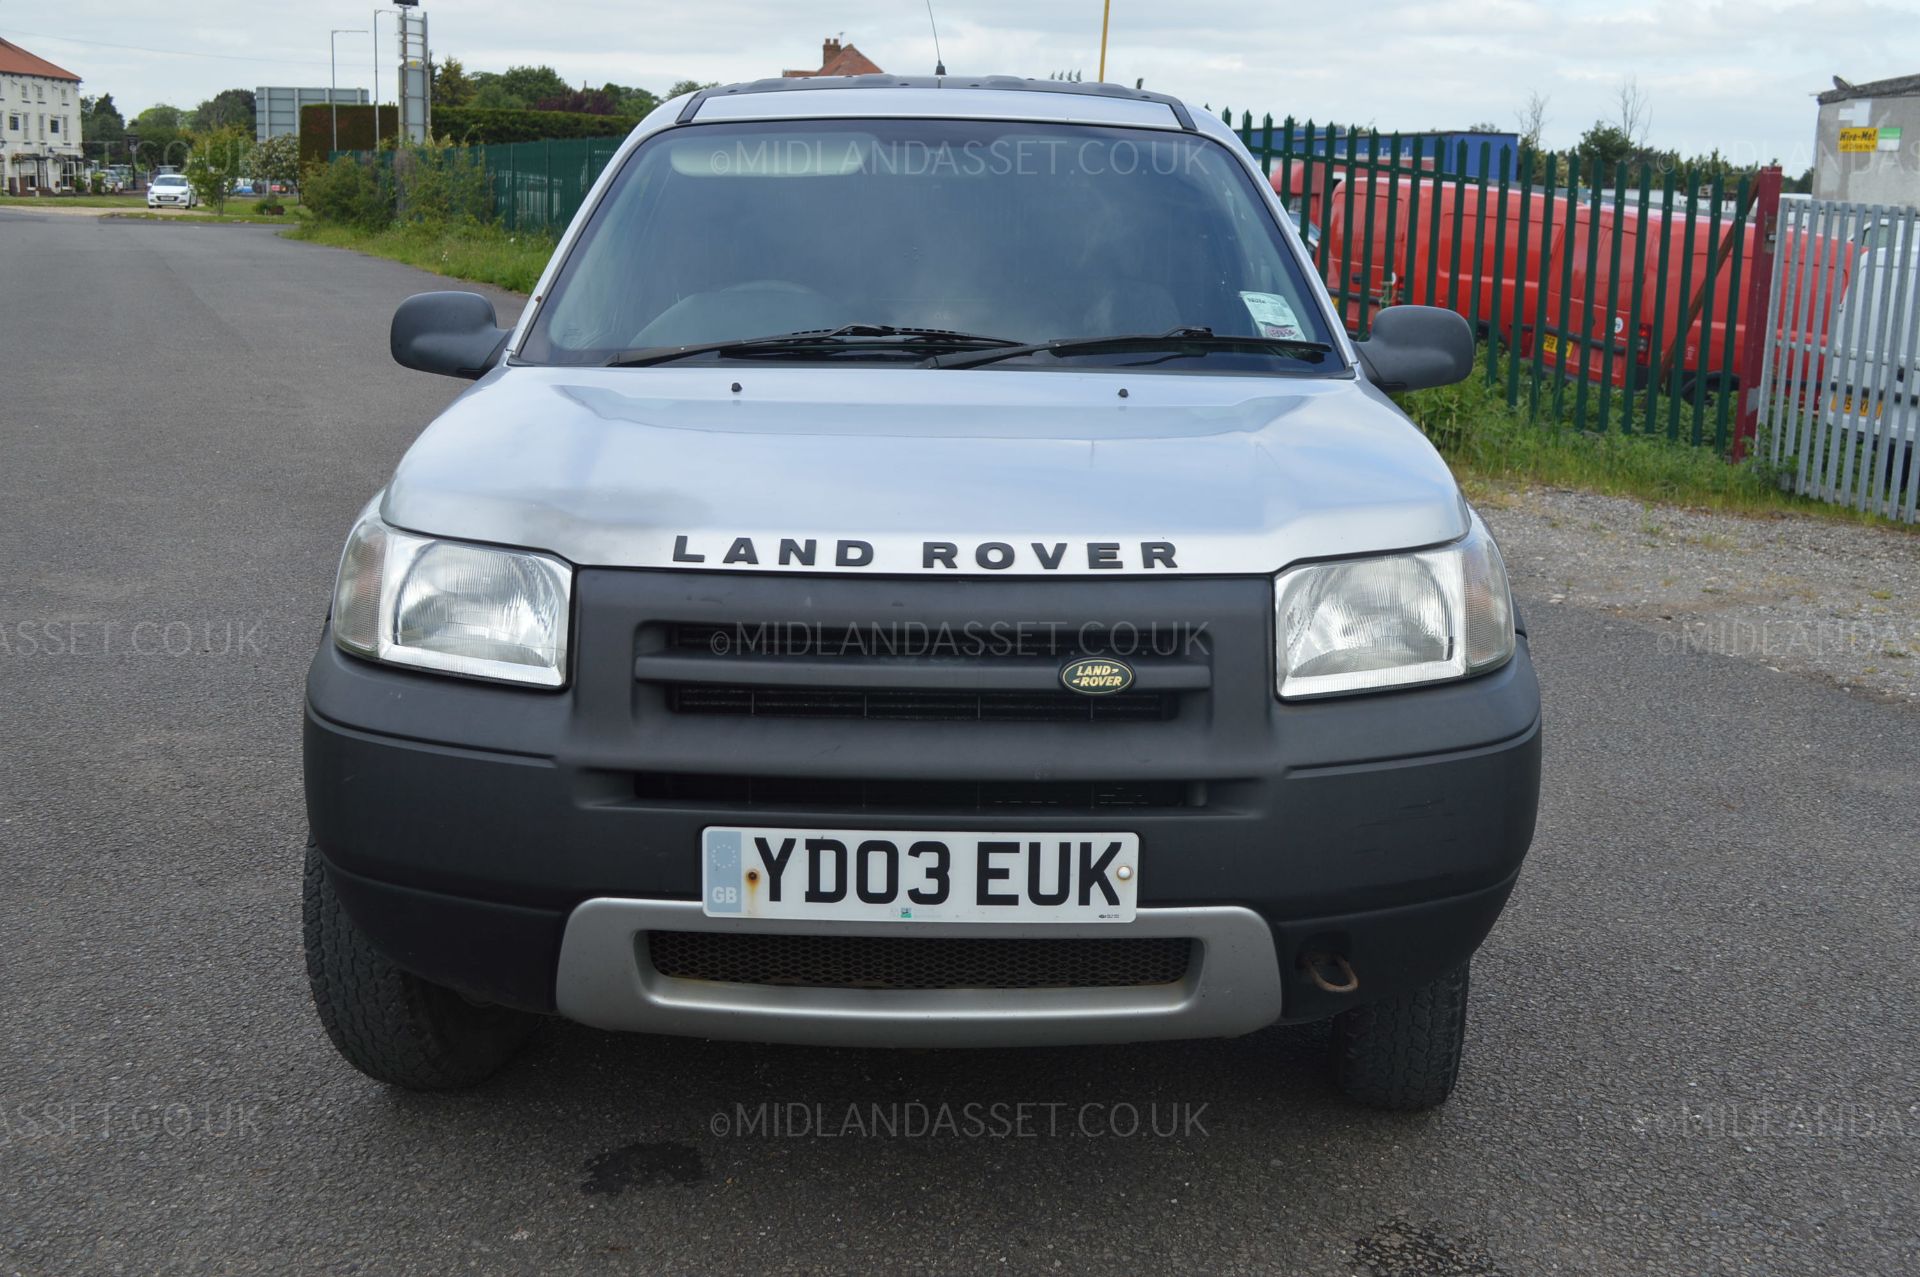 2003/03 REG LAND ROVER FREELANDER 3DR 2.0 TD4 SWB COMMERCIAL 4X4 SPECIAL VEHICLE - AIR CON *NO VAT* - Image 2 of 42